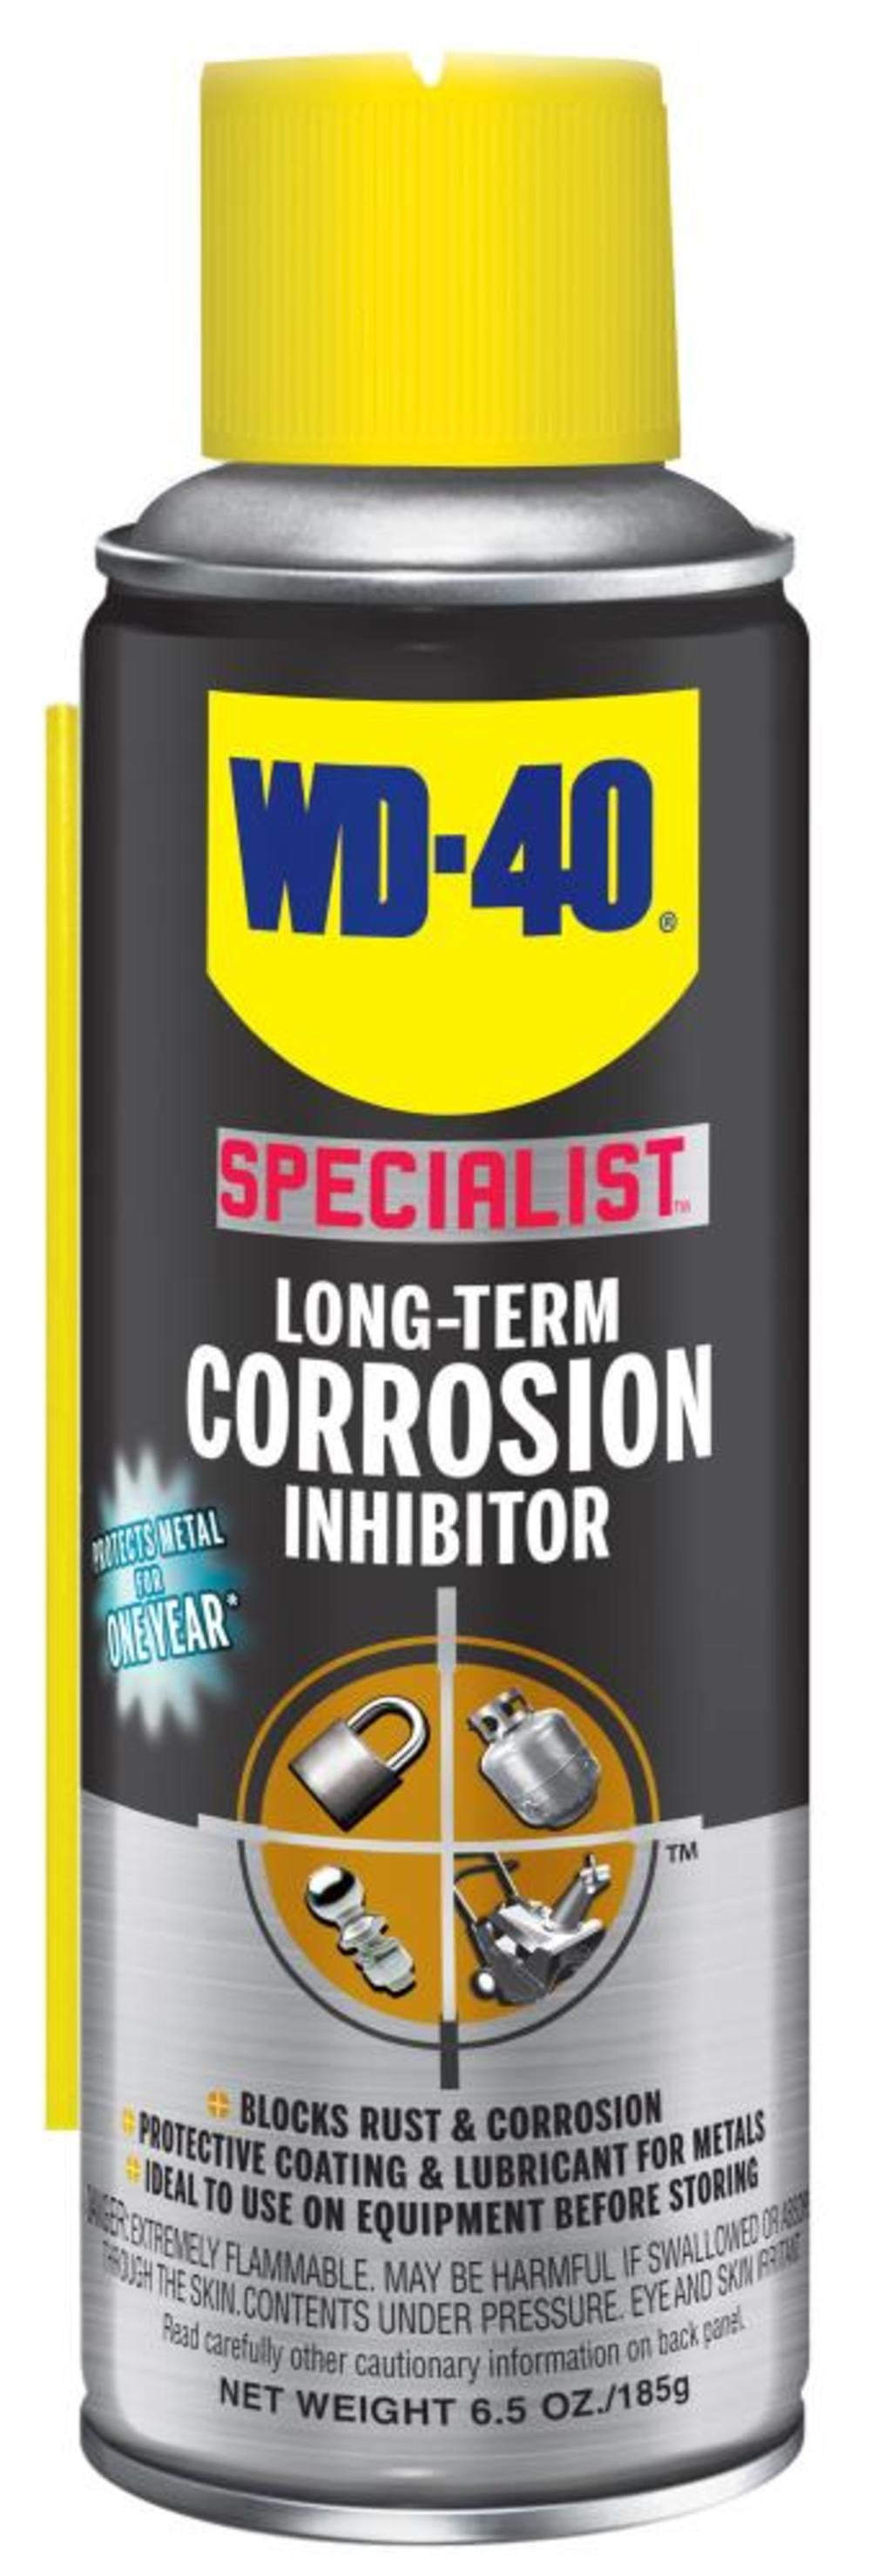 WD-40 Specialist Corrosion Inhibitor, Long-Lasting Anti-Rust Spray, 6.5 OZ  [6-Pack]